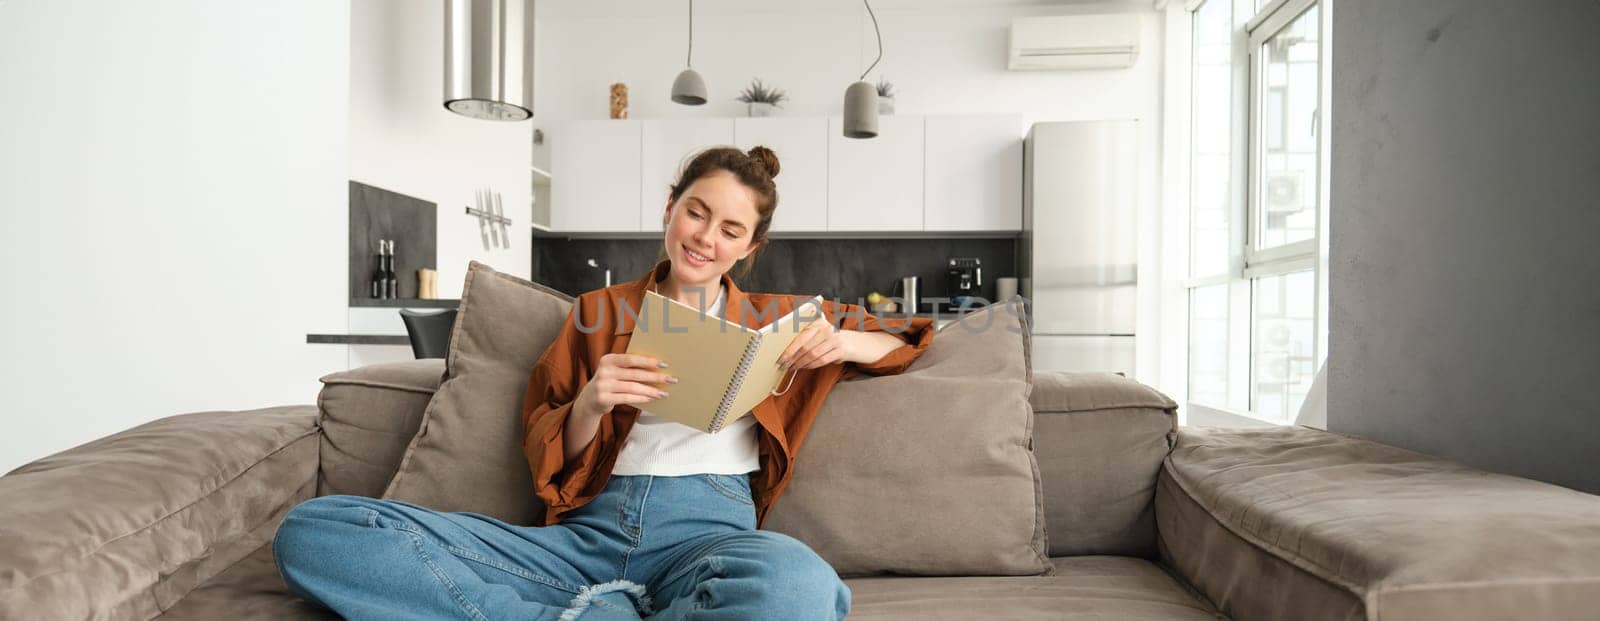 Beautiful young female student, sitting at home on sofa, relaxing on couch, reading notebook and smiling.